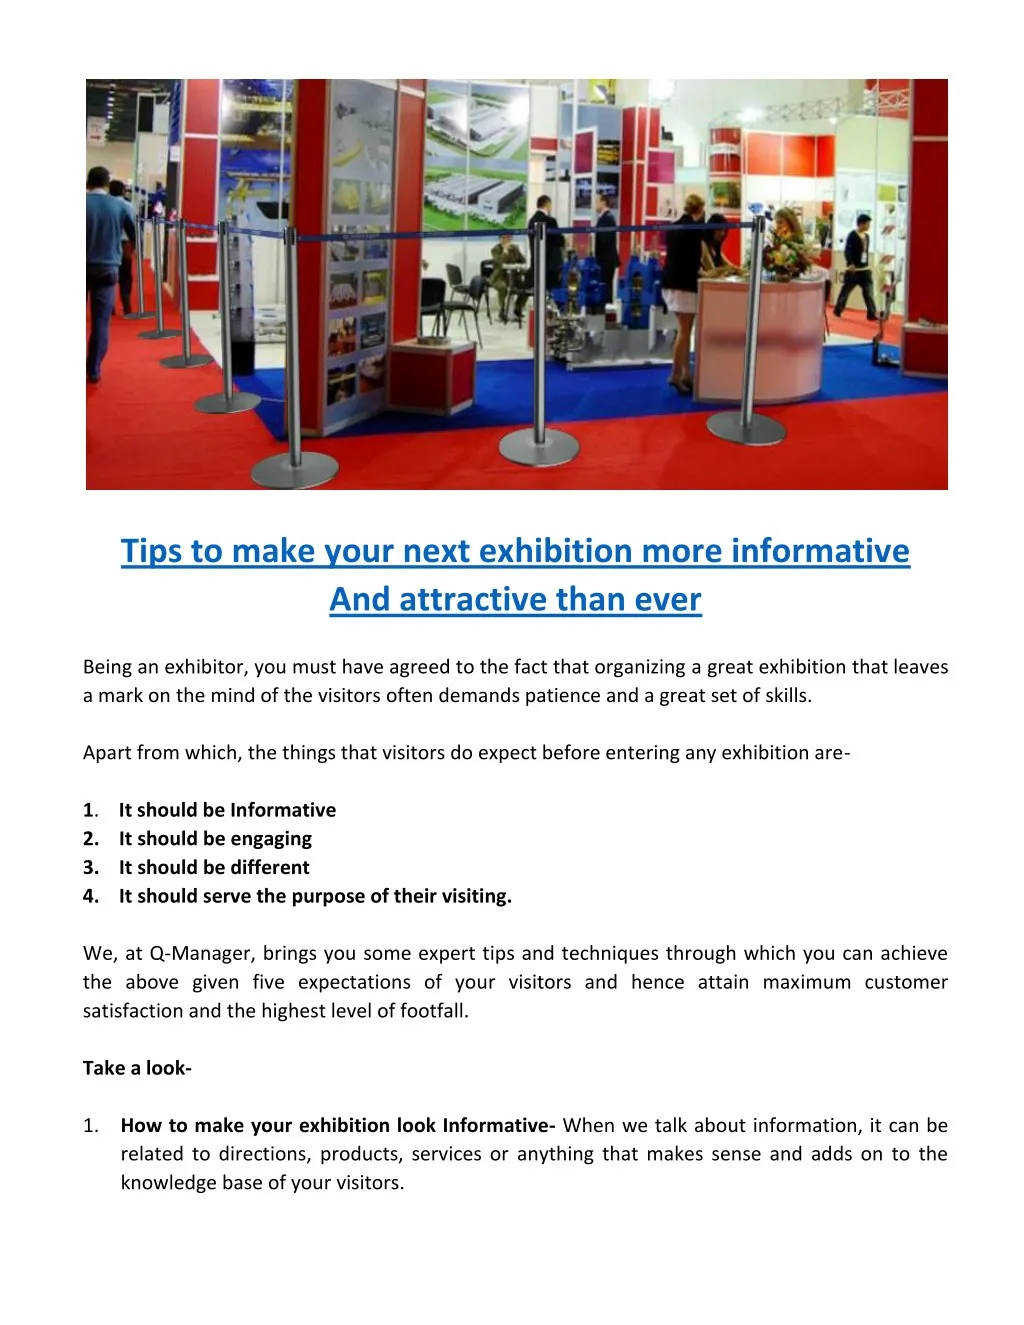 tips to make your next exhibition more